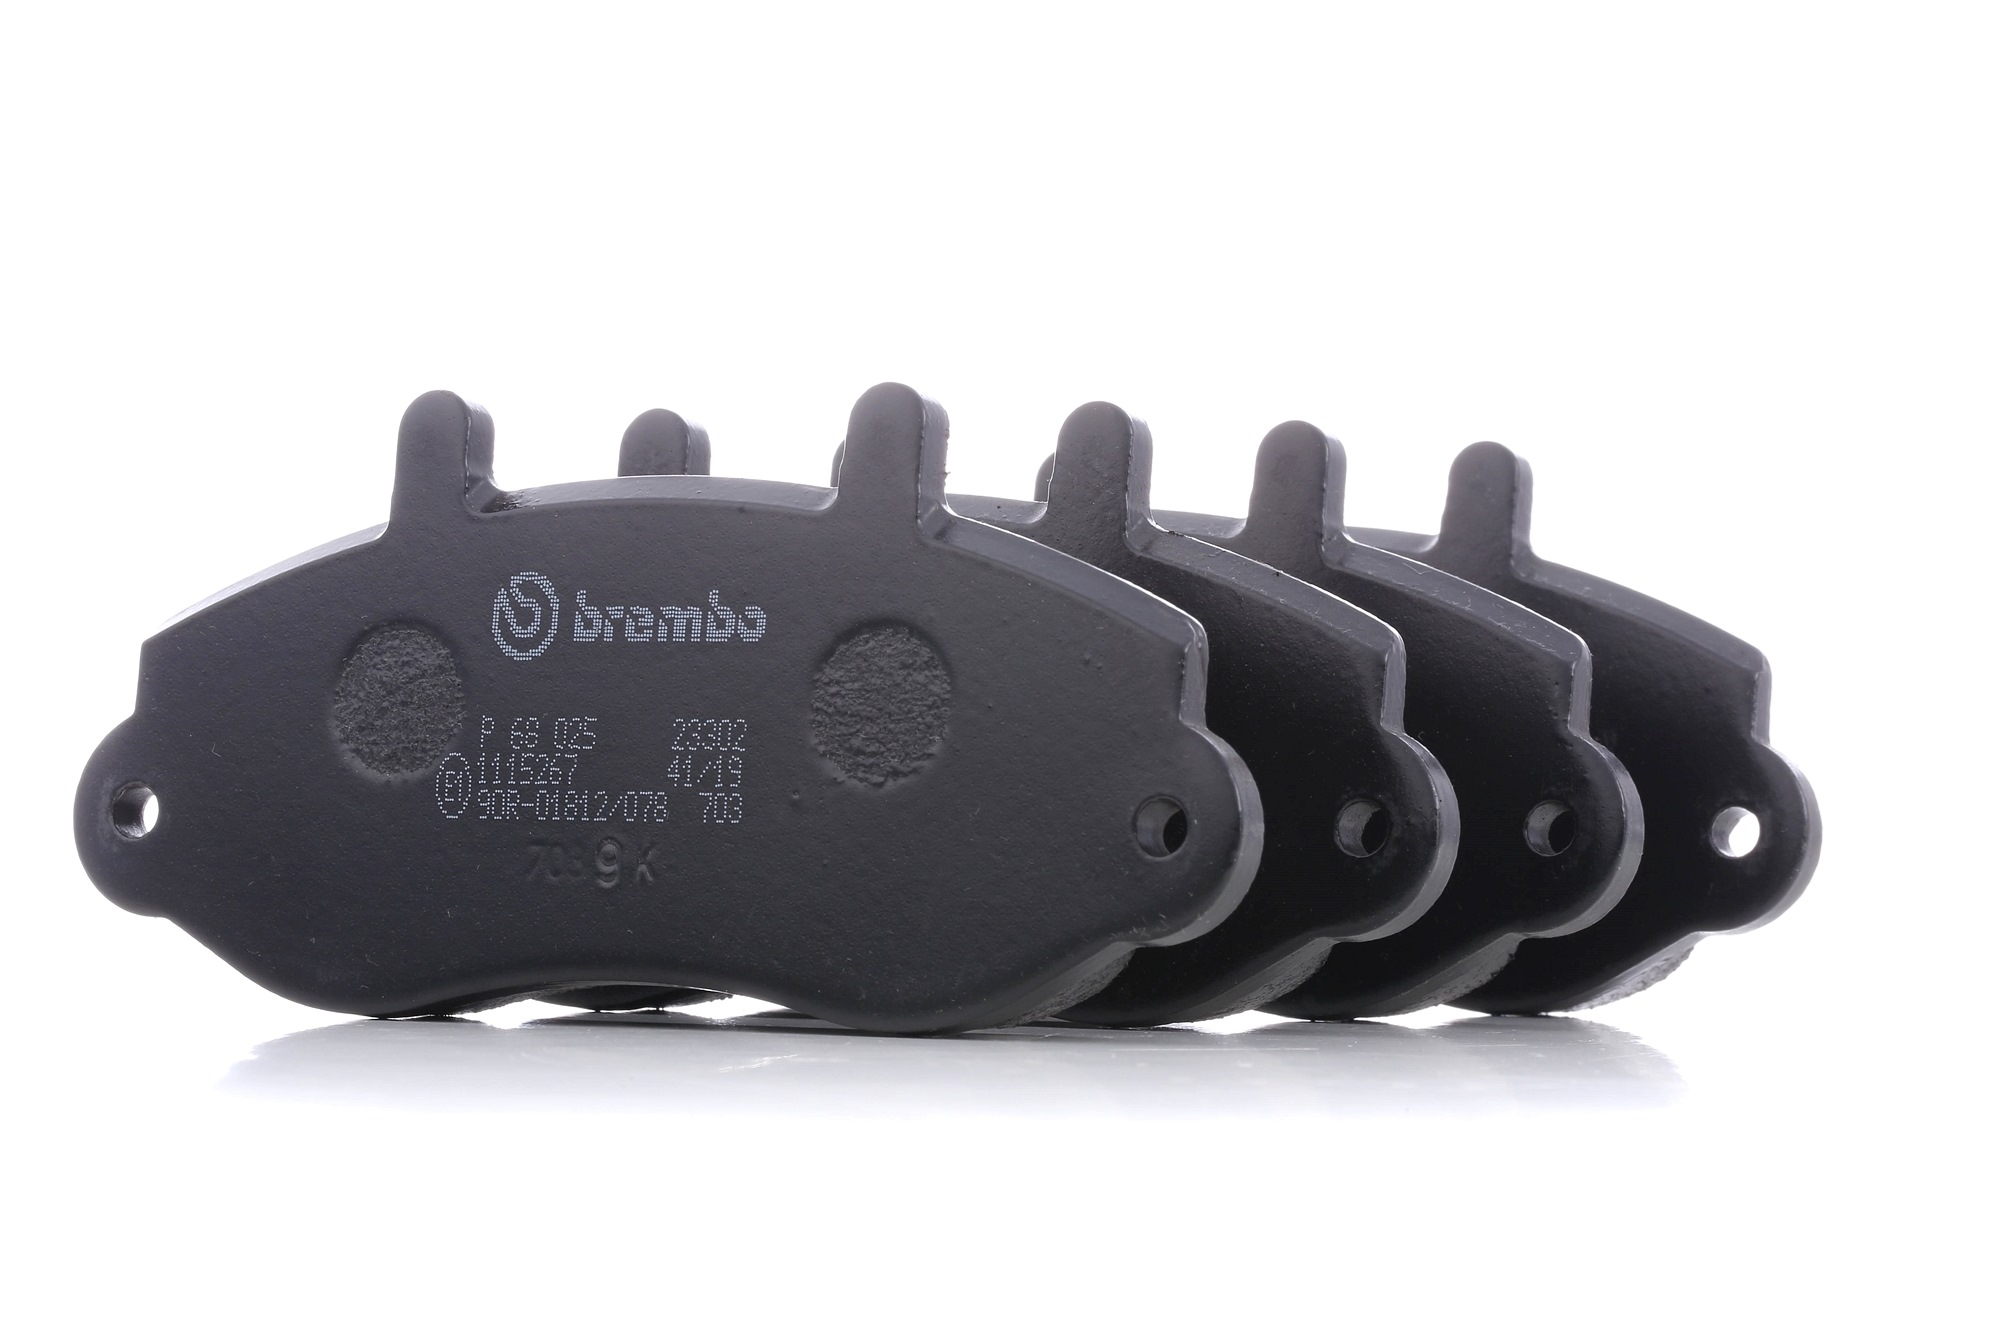 Opel MOVANO Disk pads 1661682 BREMBO P 68 025 online buy